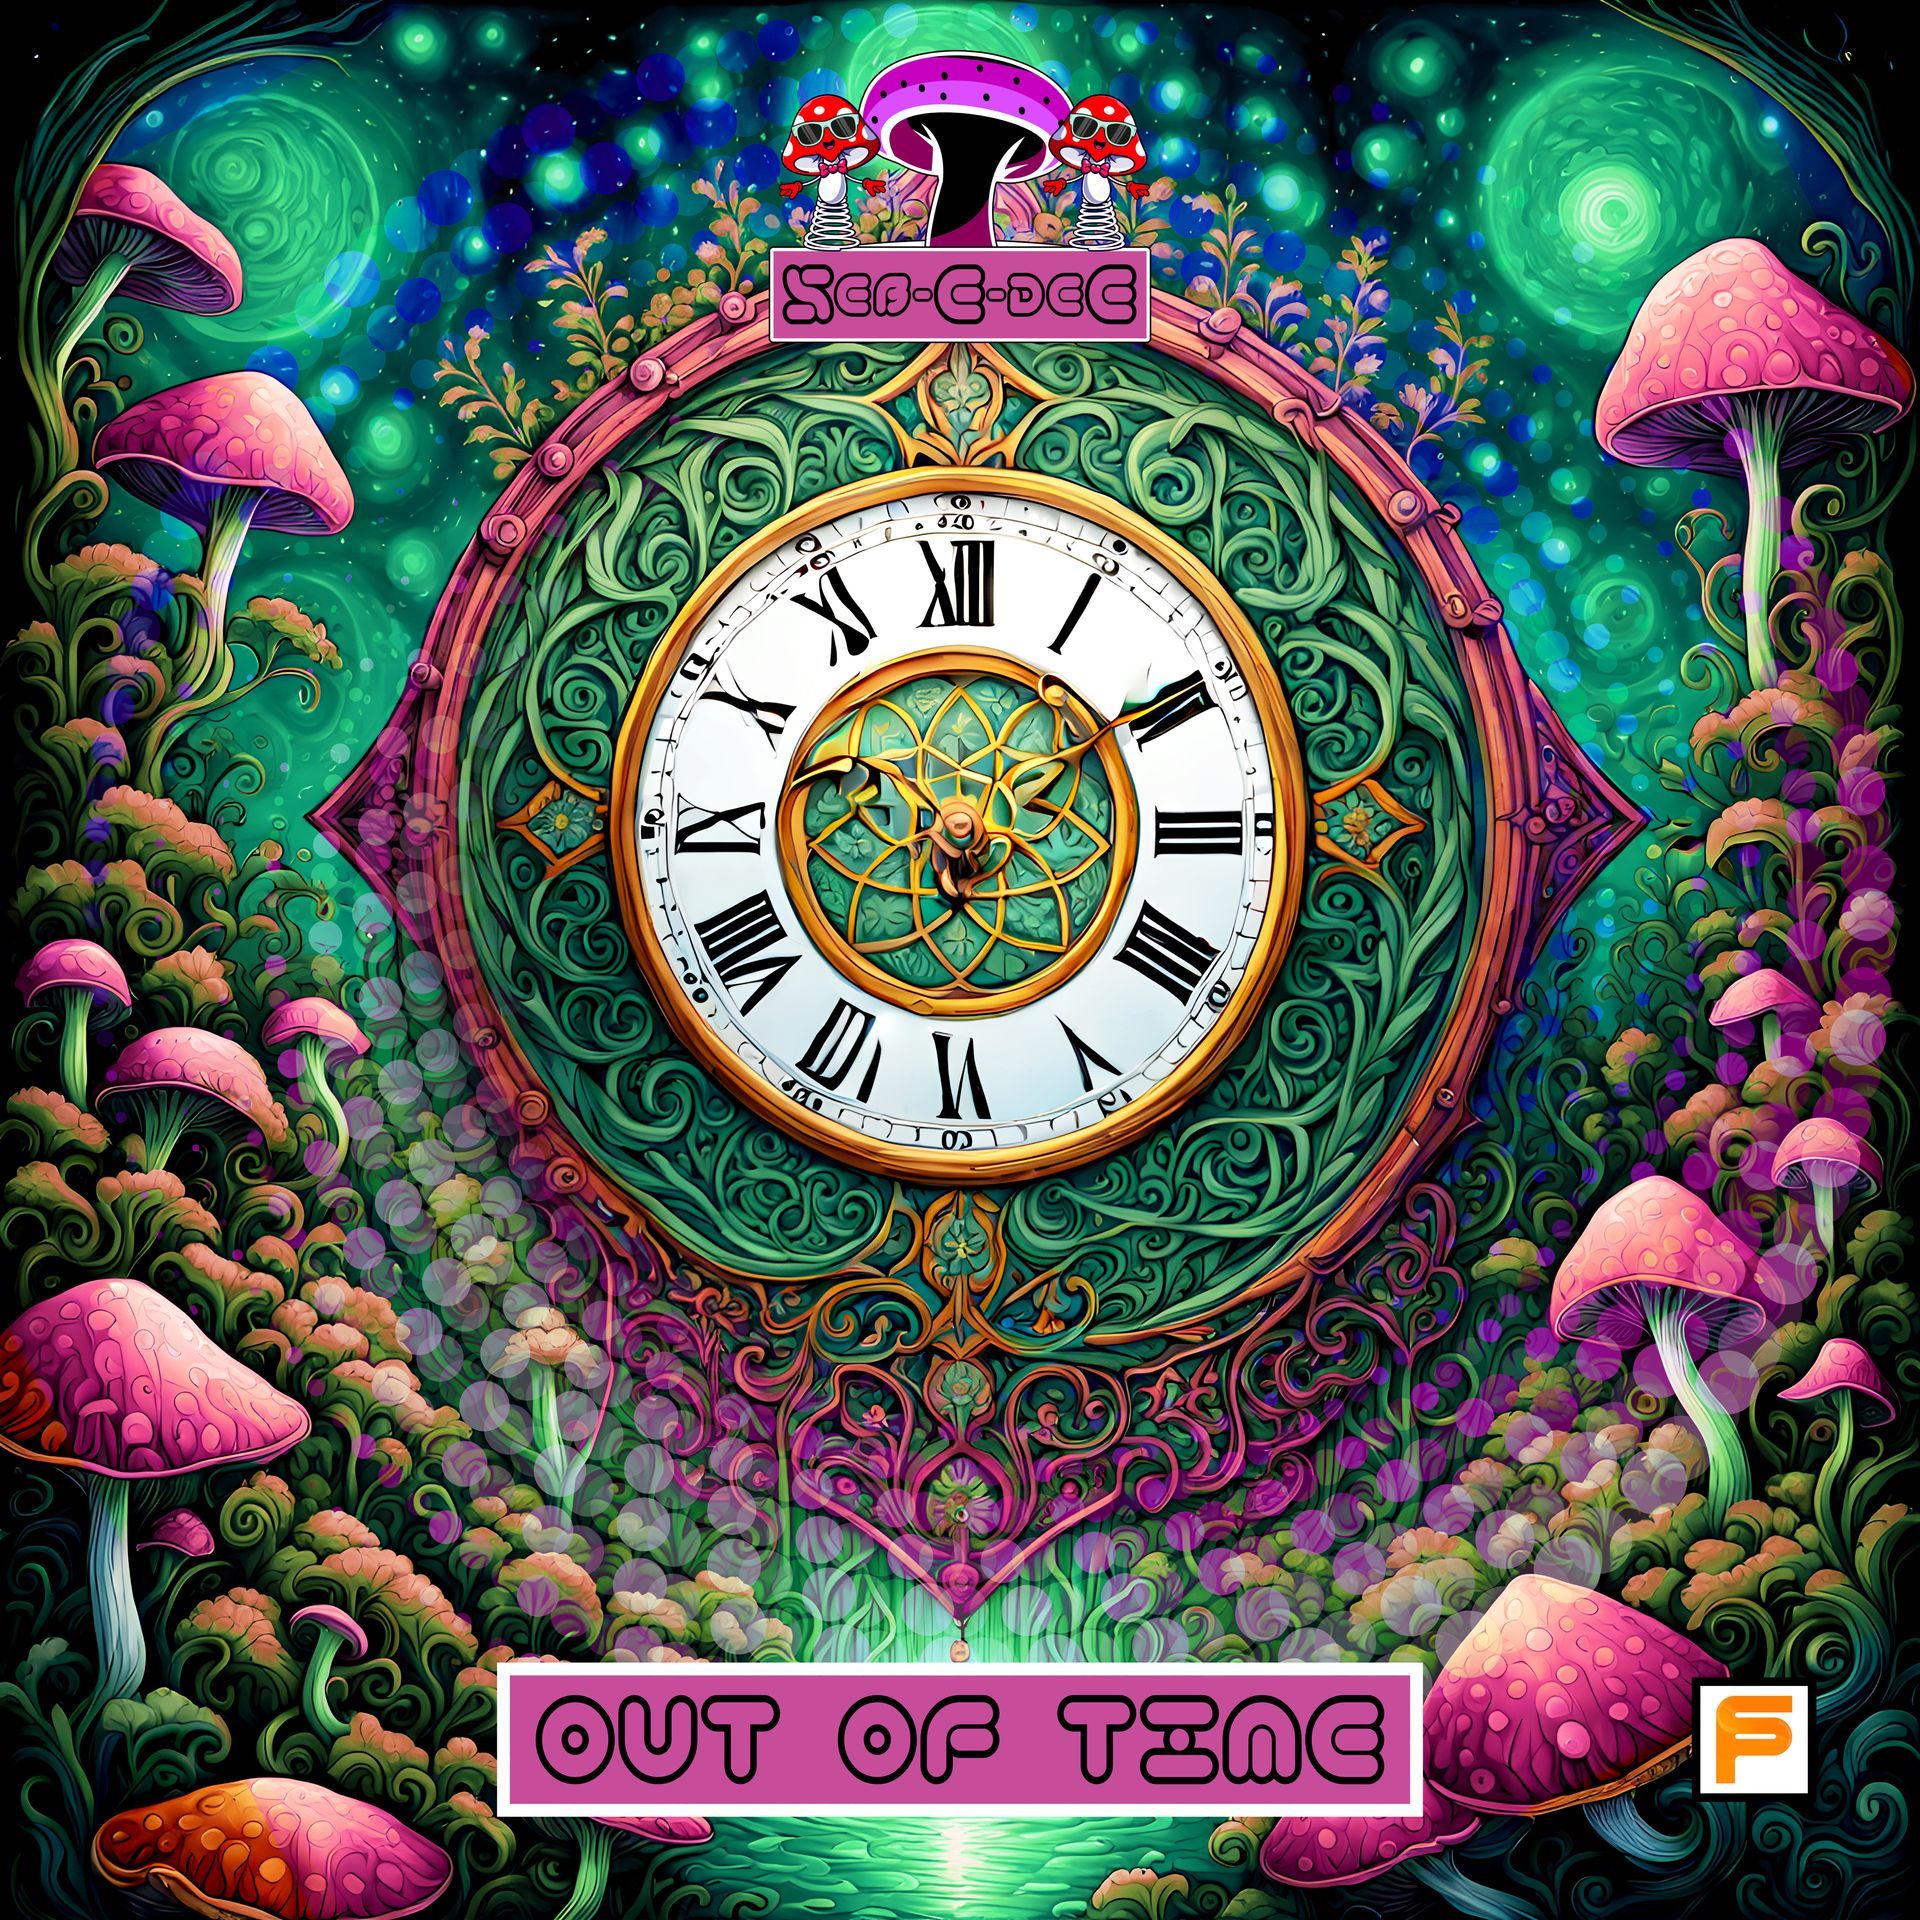 Out Of Time Artwork and Seb-E-deE Logo